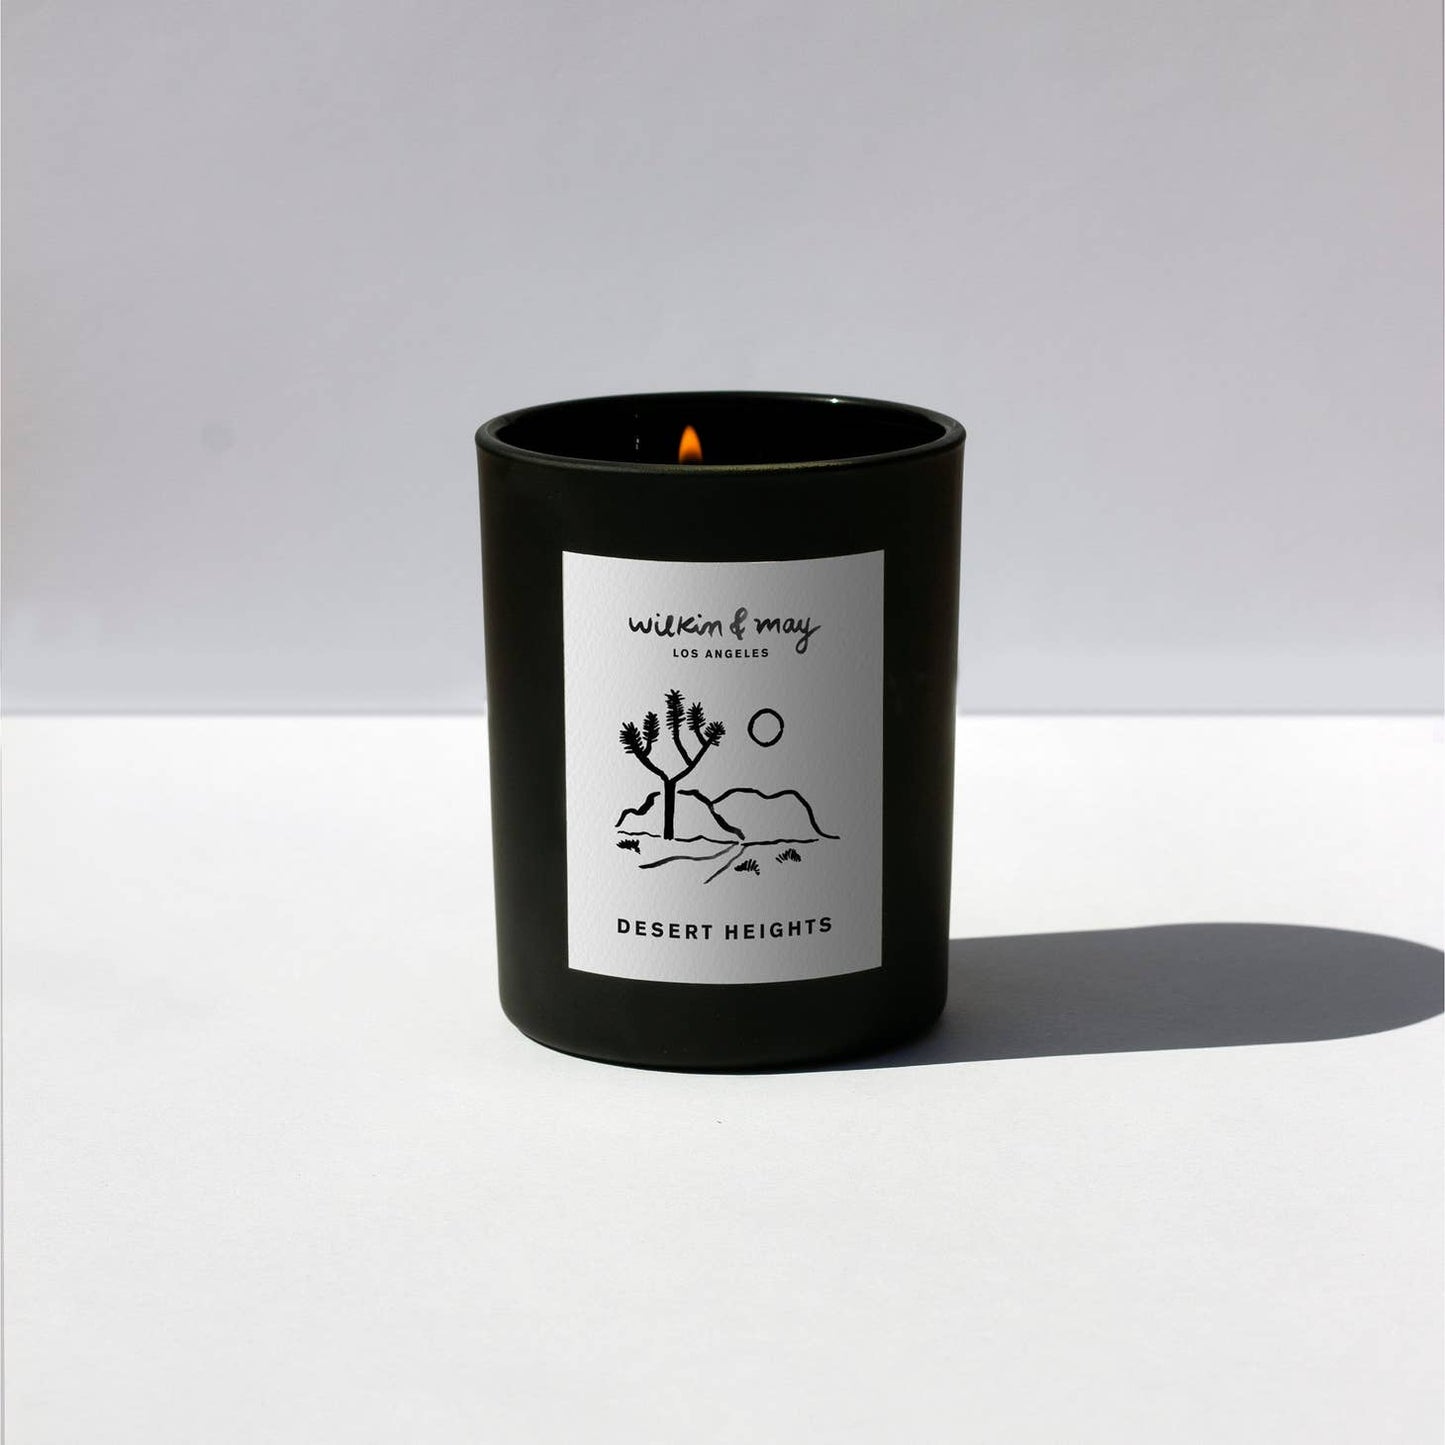 An organic coconut wax blend candle with notes of wild cypress, white cedar, patchouli, clove leaf & lemon.   With Lead-free cotton wick for clean burning. Essential oil and fragrance oil blend.